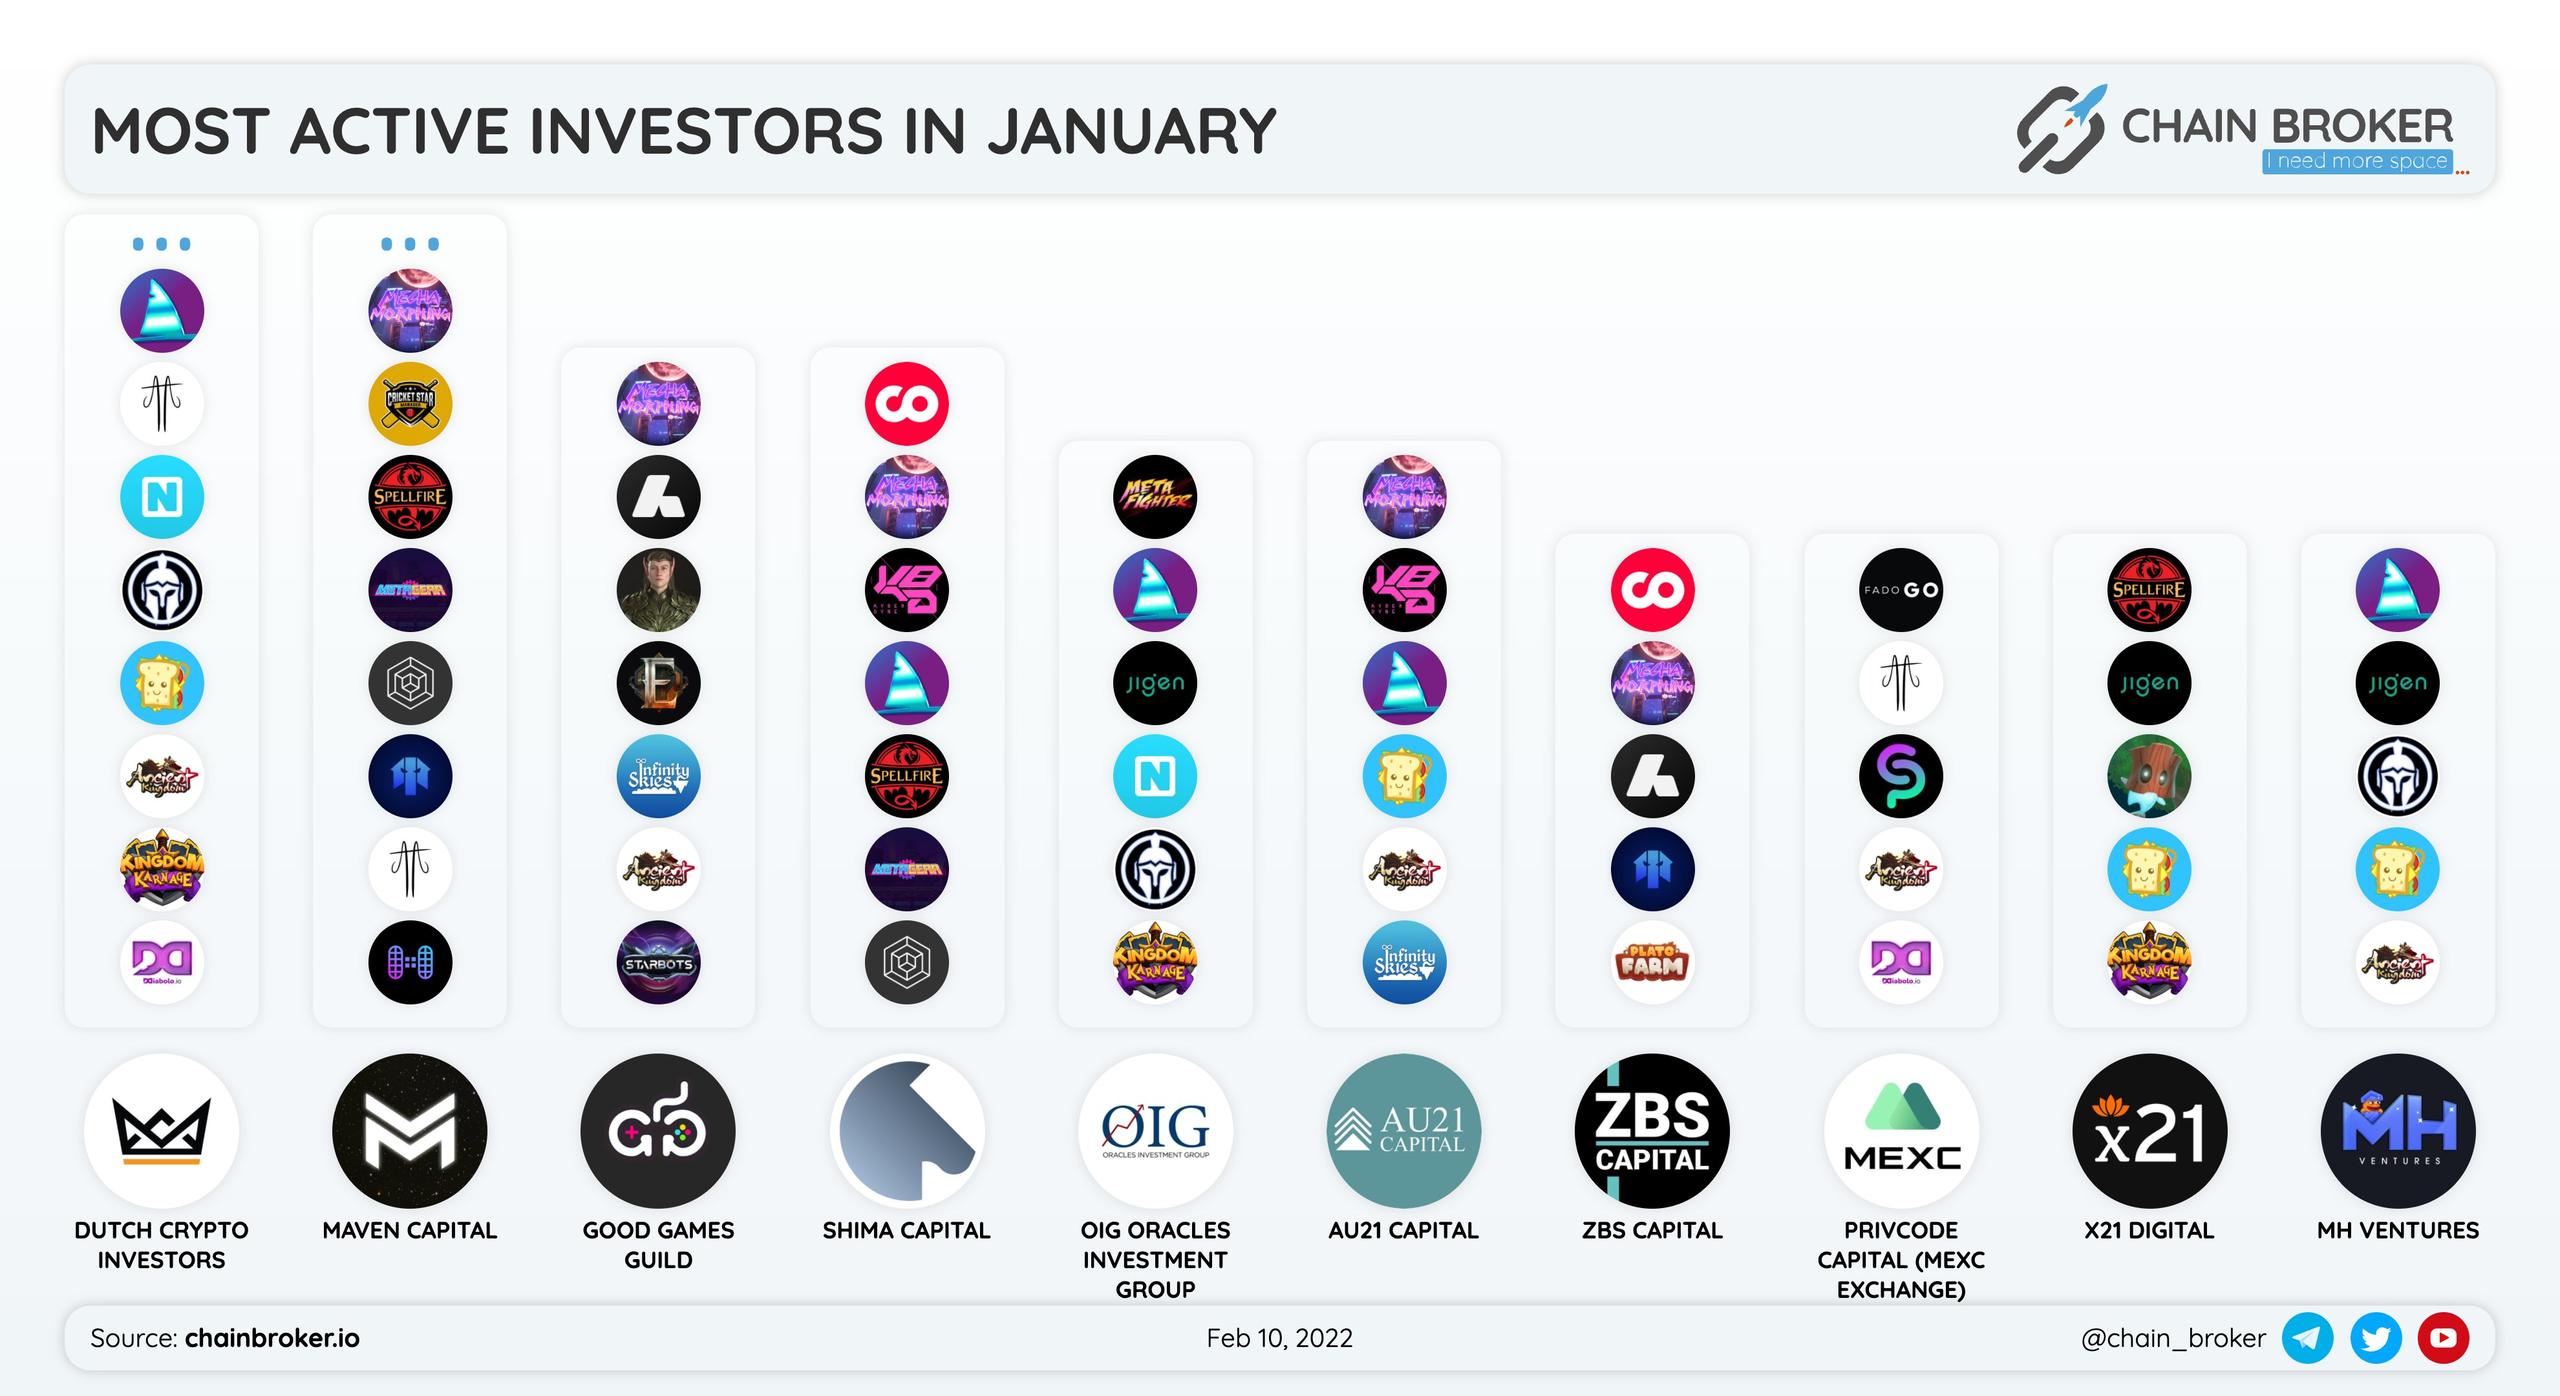 Most active investors in January